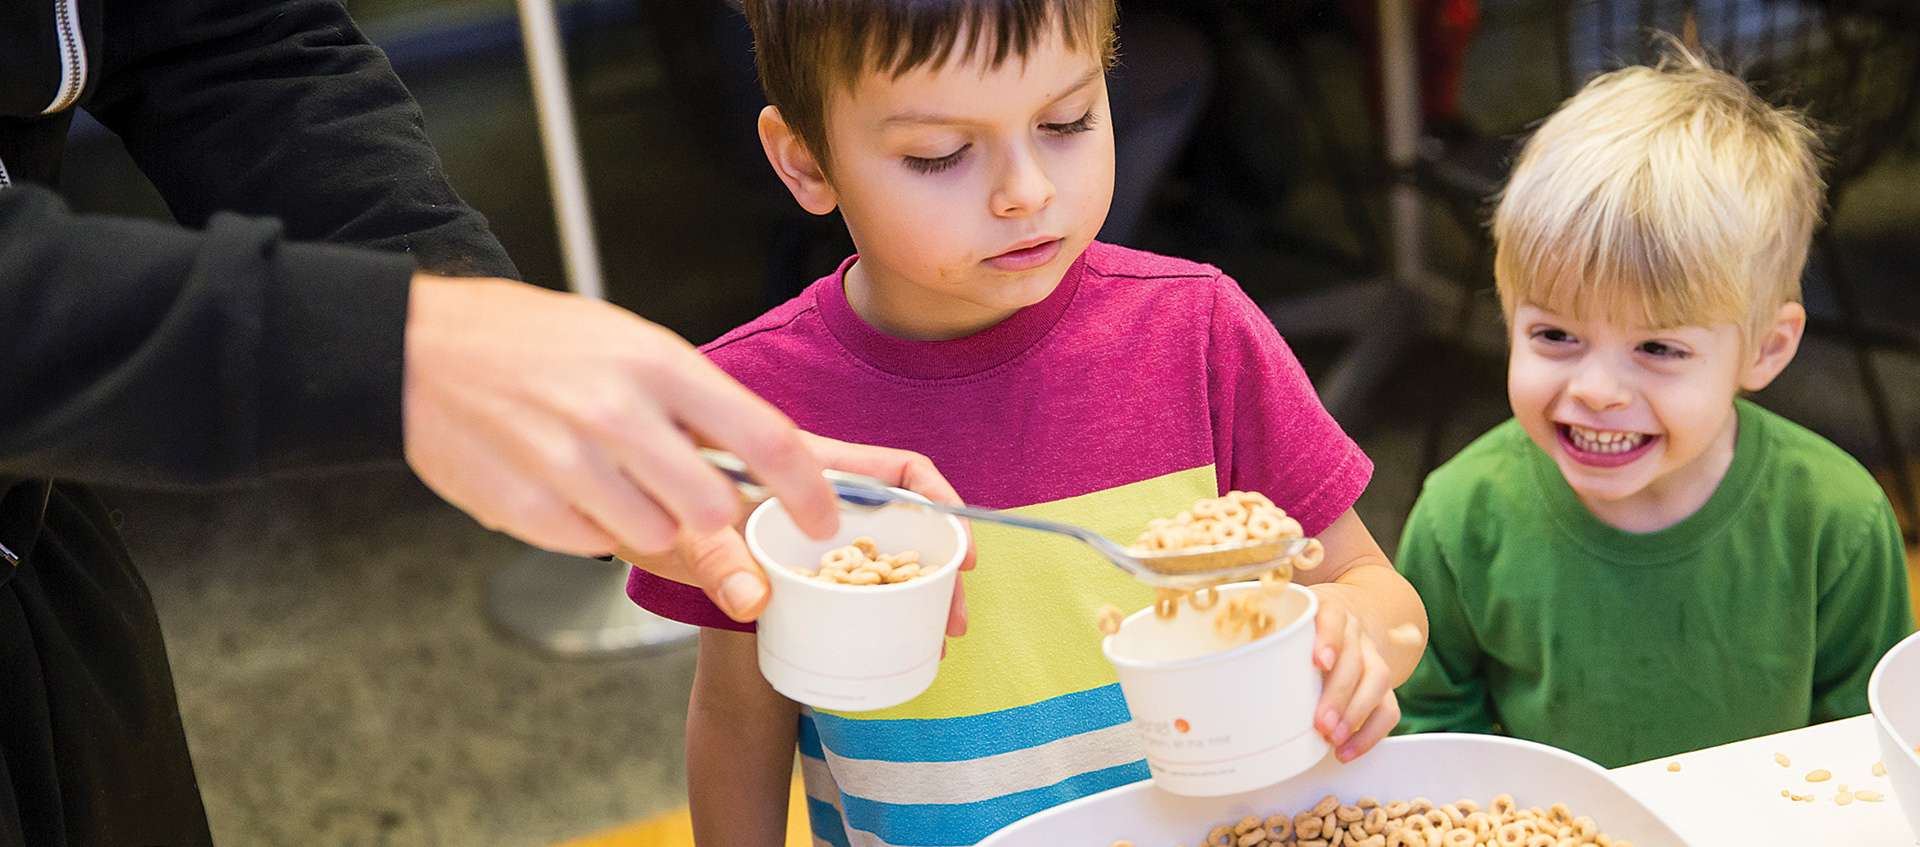 Child being served cereal